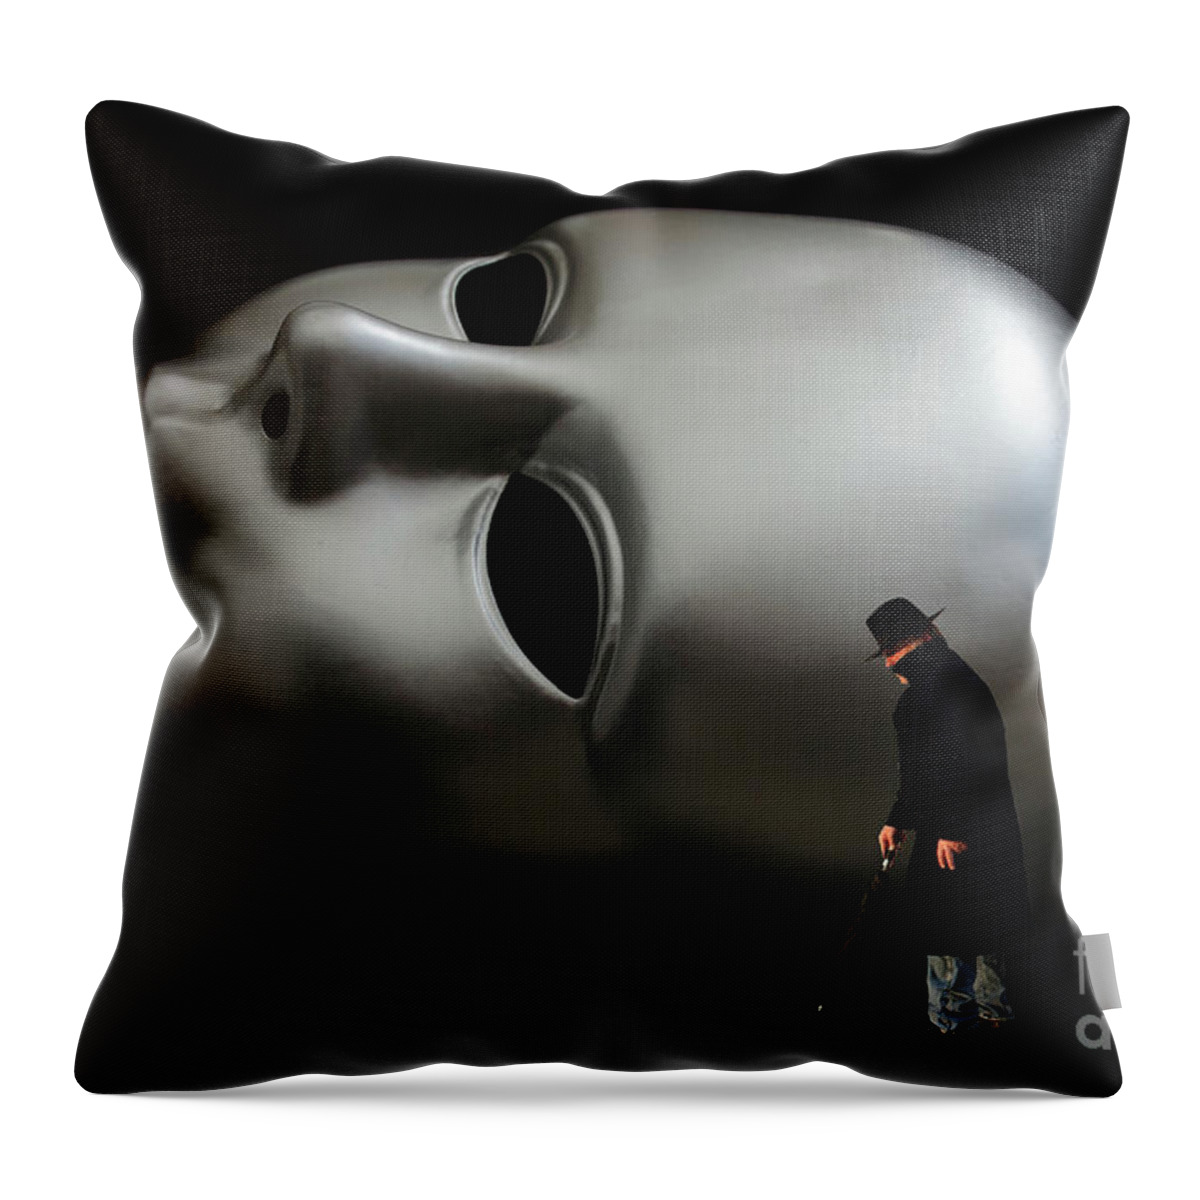 We All Wear Masks Throw Pillow featuring the photograph We All Wear Masks 4 by Bob Christopher